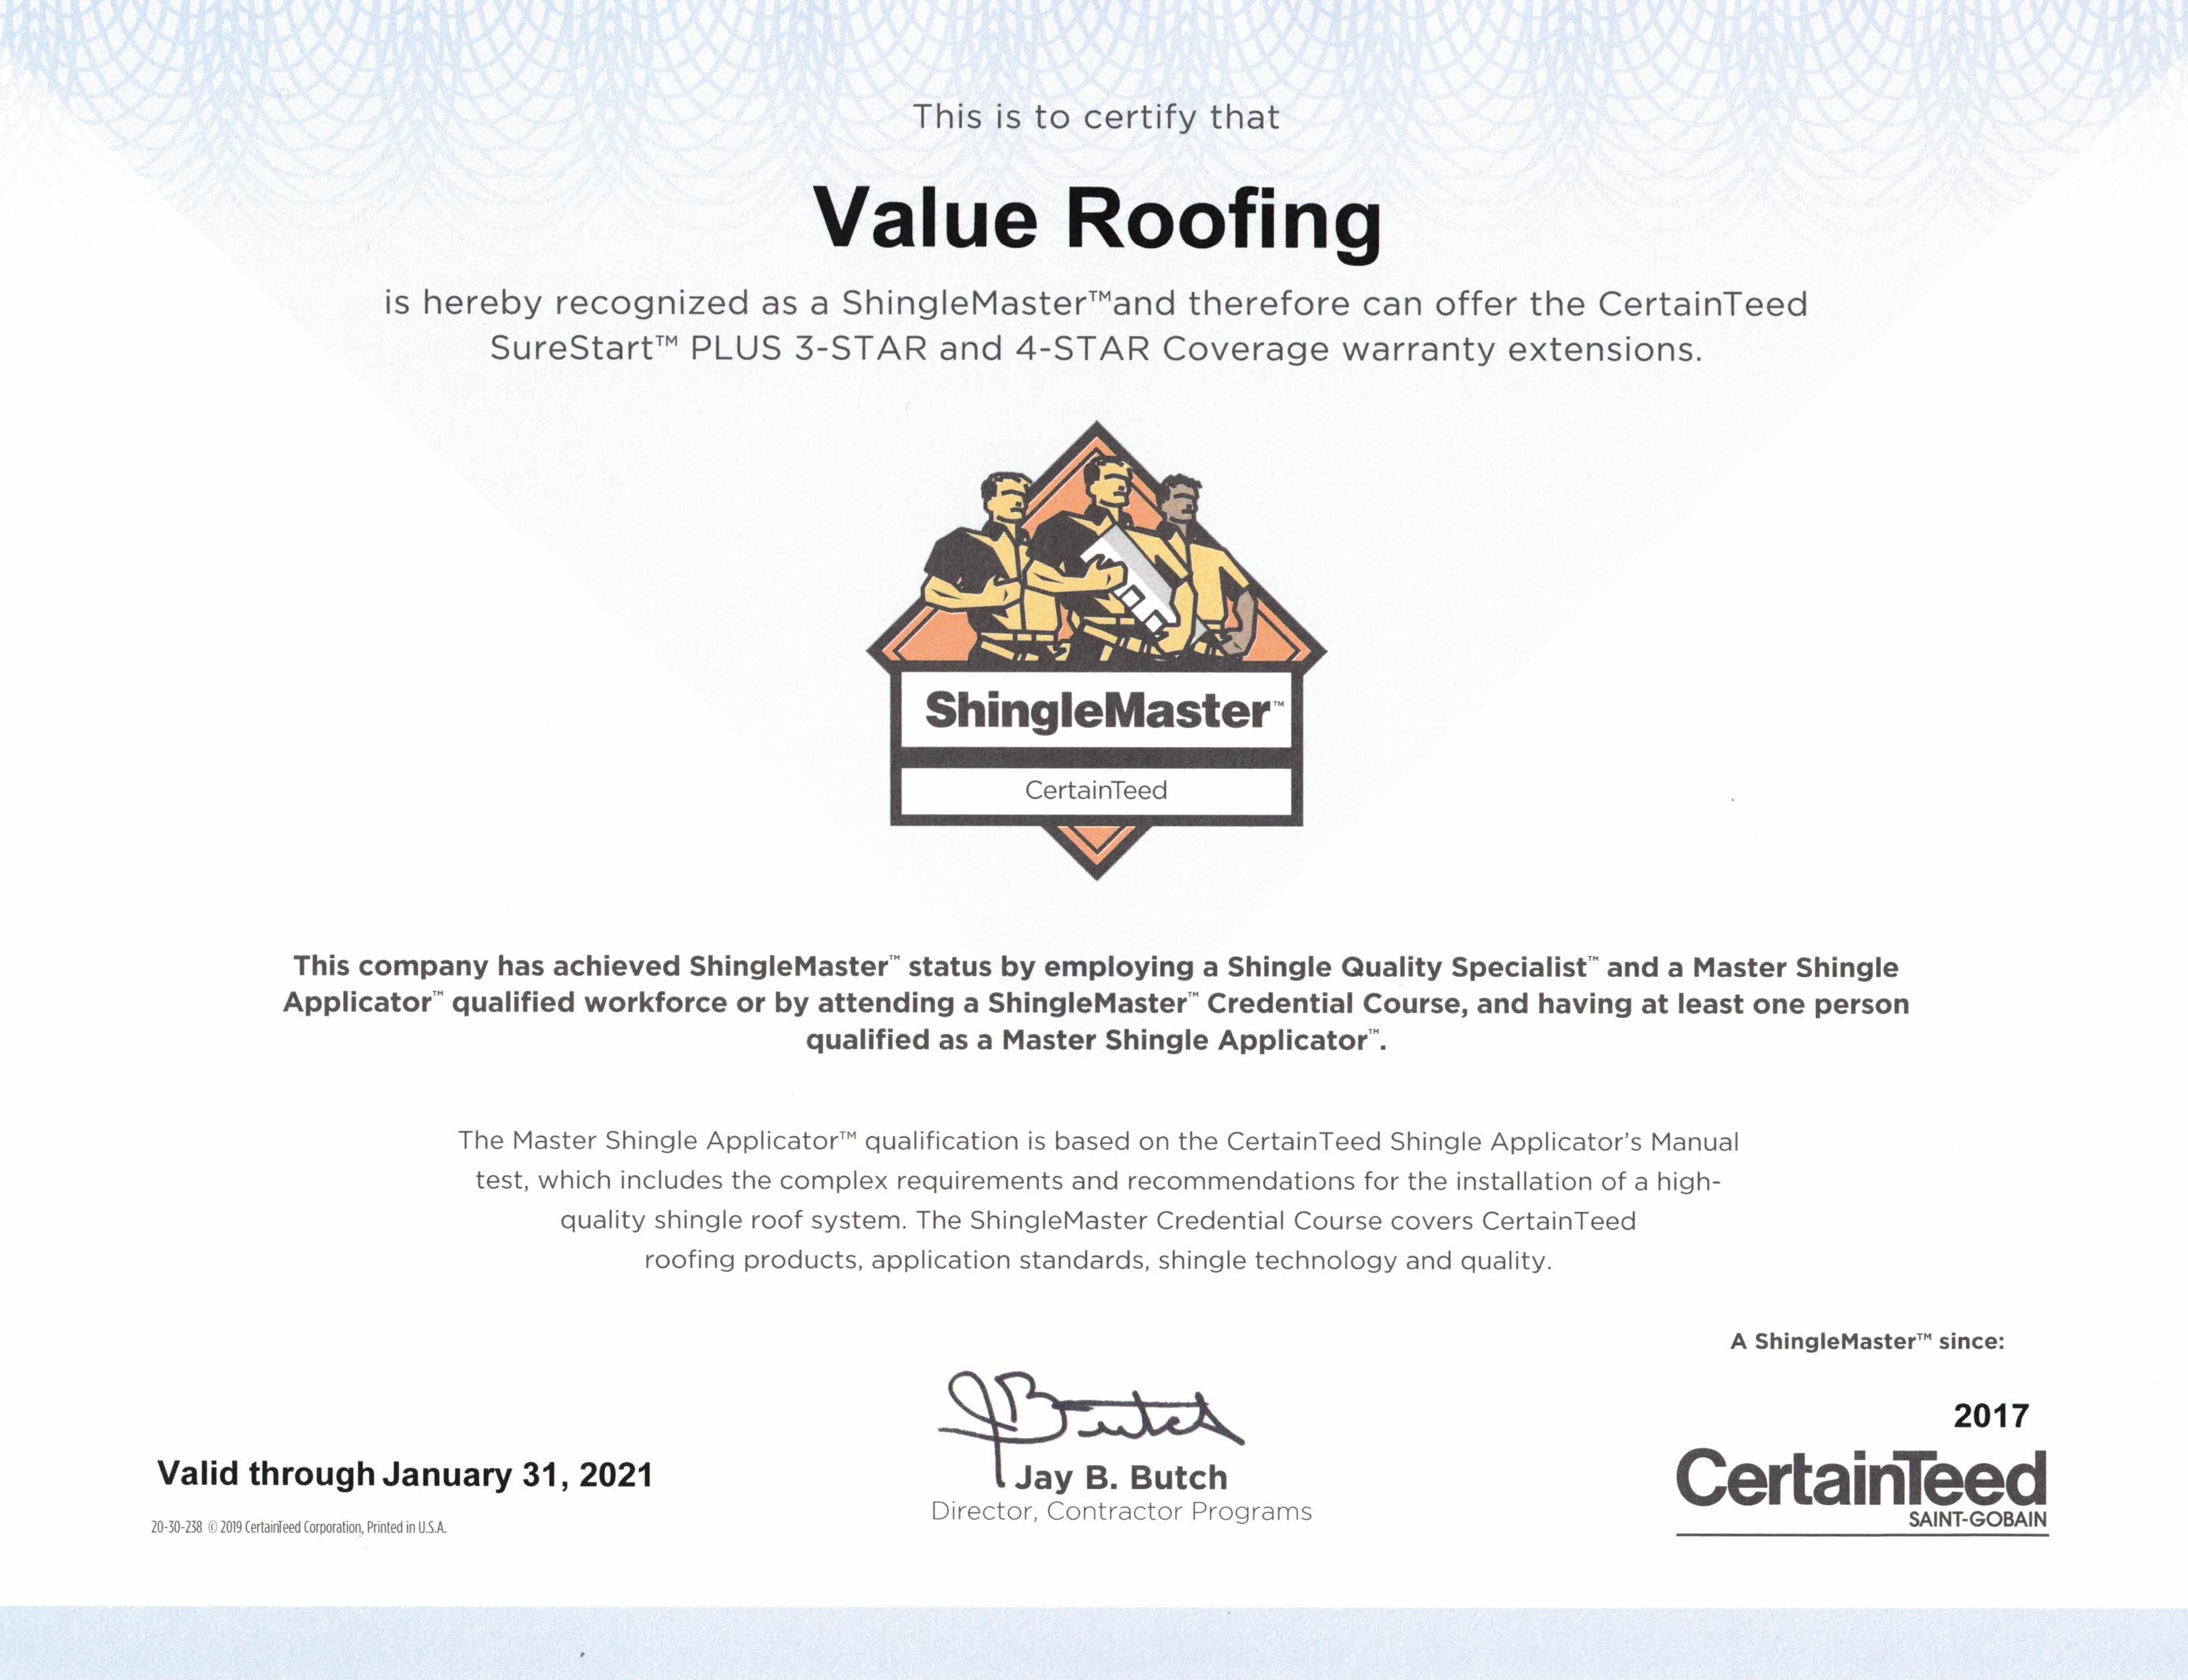 SHOULD MY ROOFING COMPANY BE MANUFACTURER CERTIFIED?